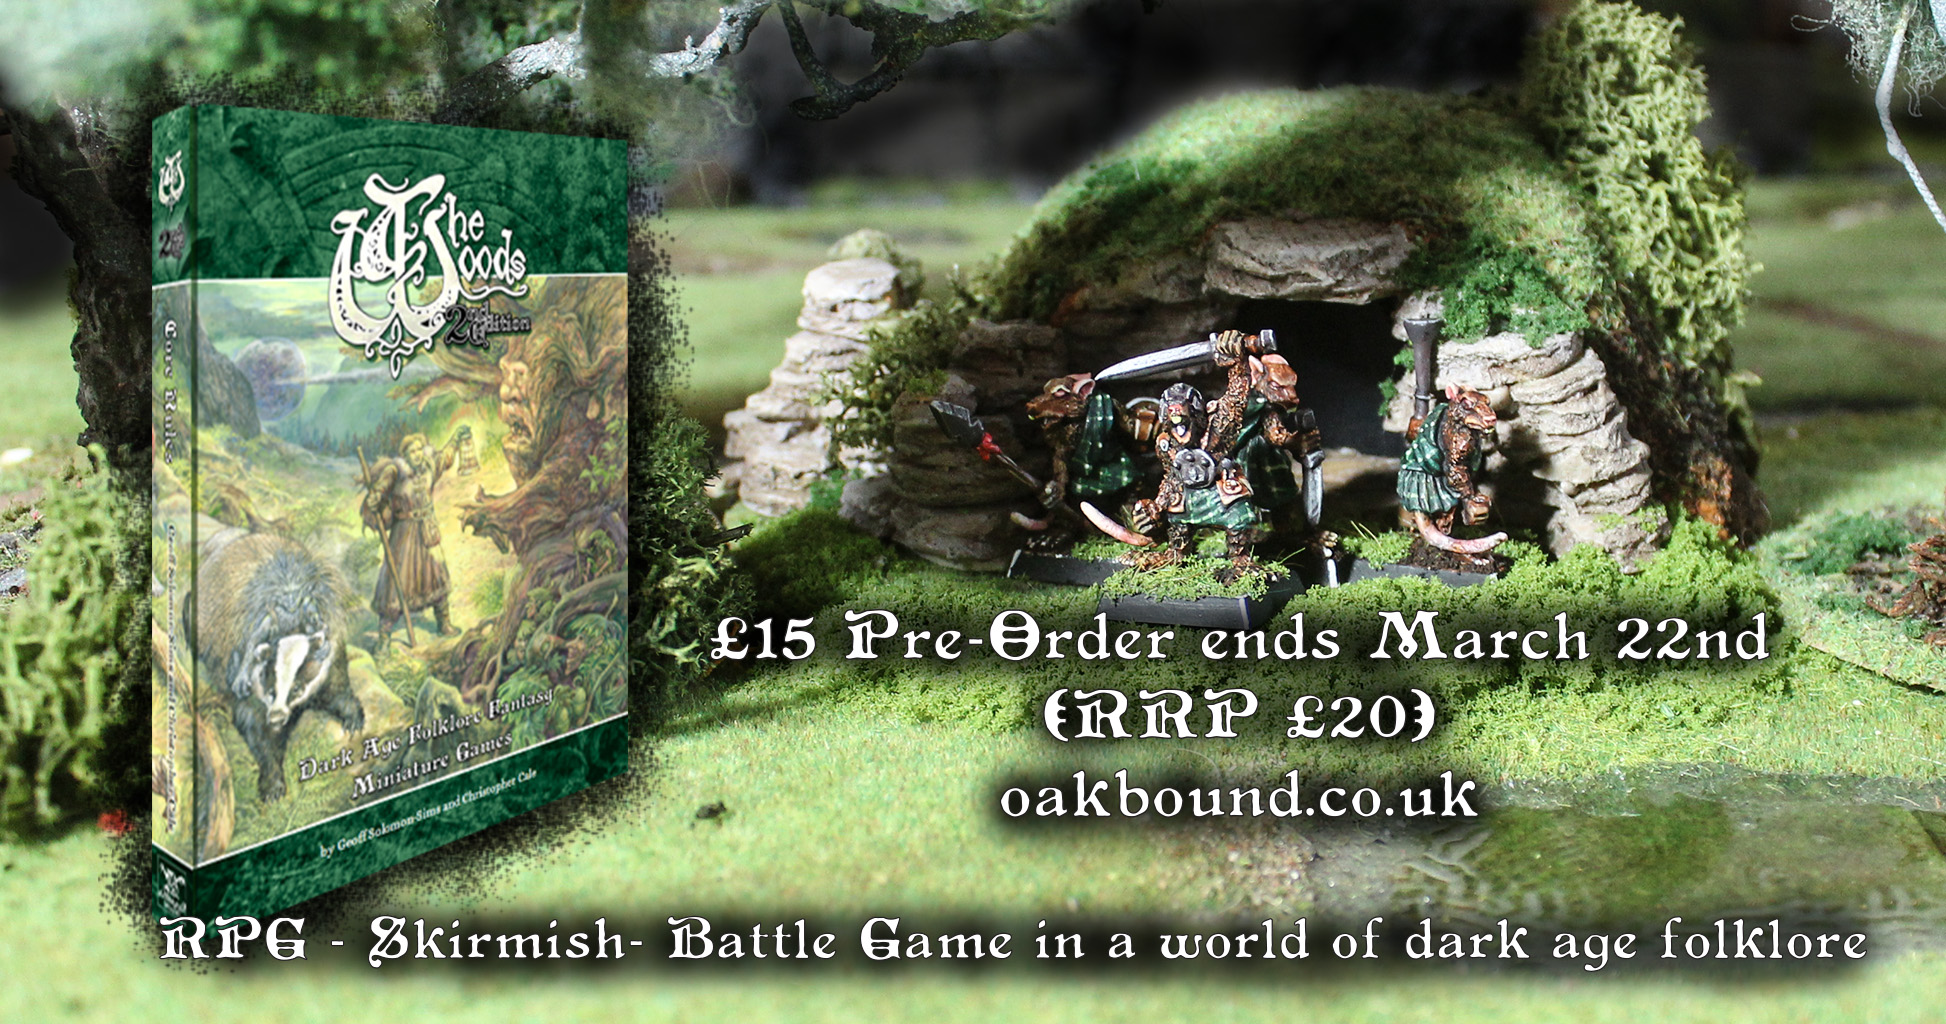 Last few days to pre-order the new The Woods rulebook